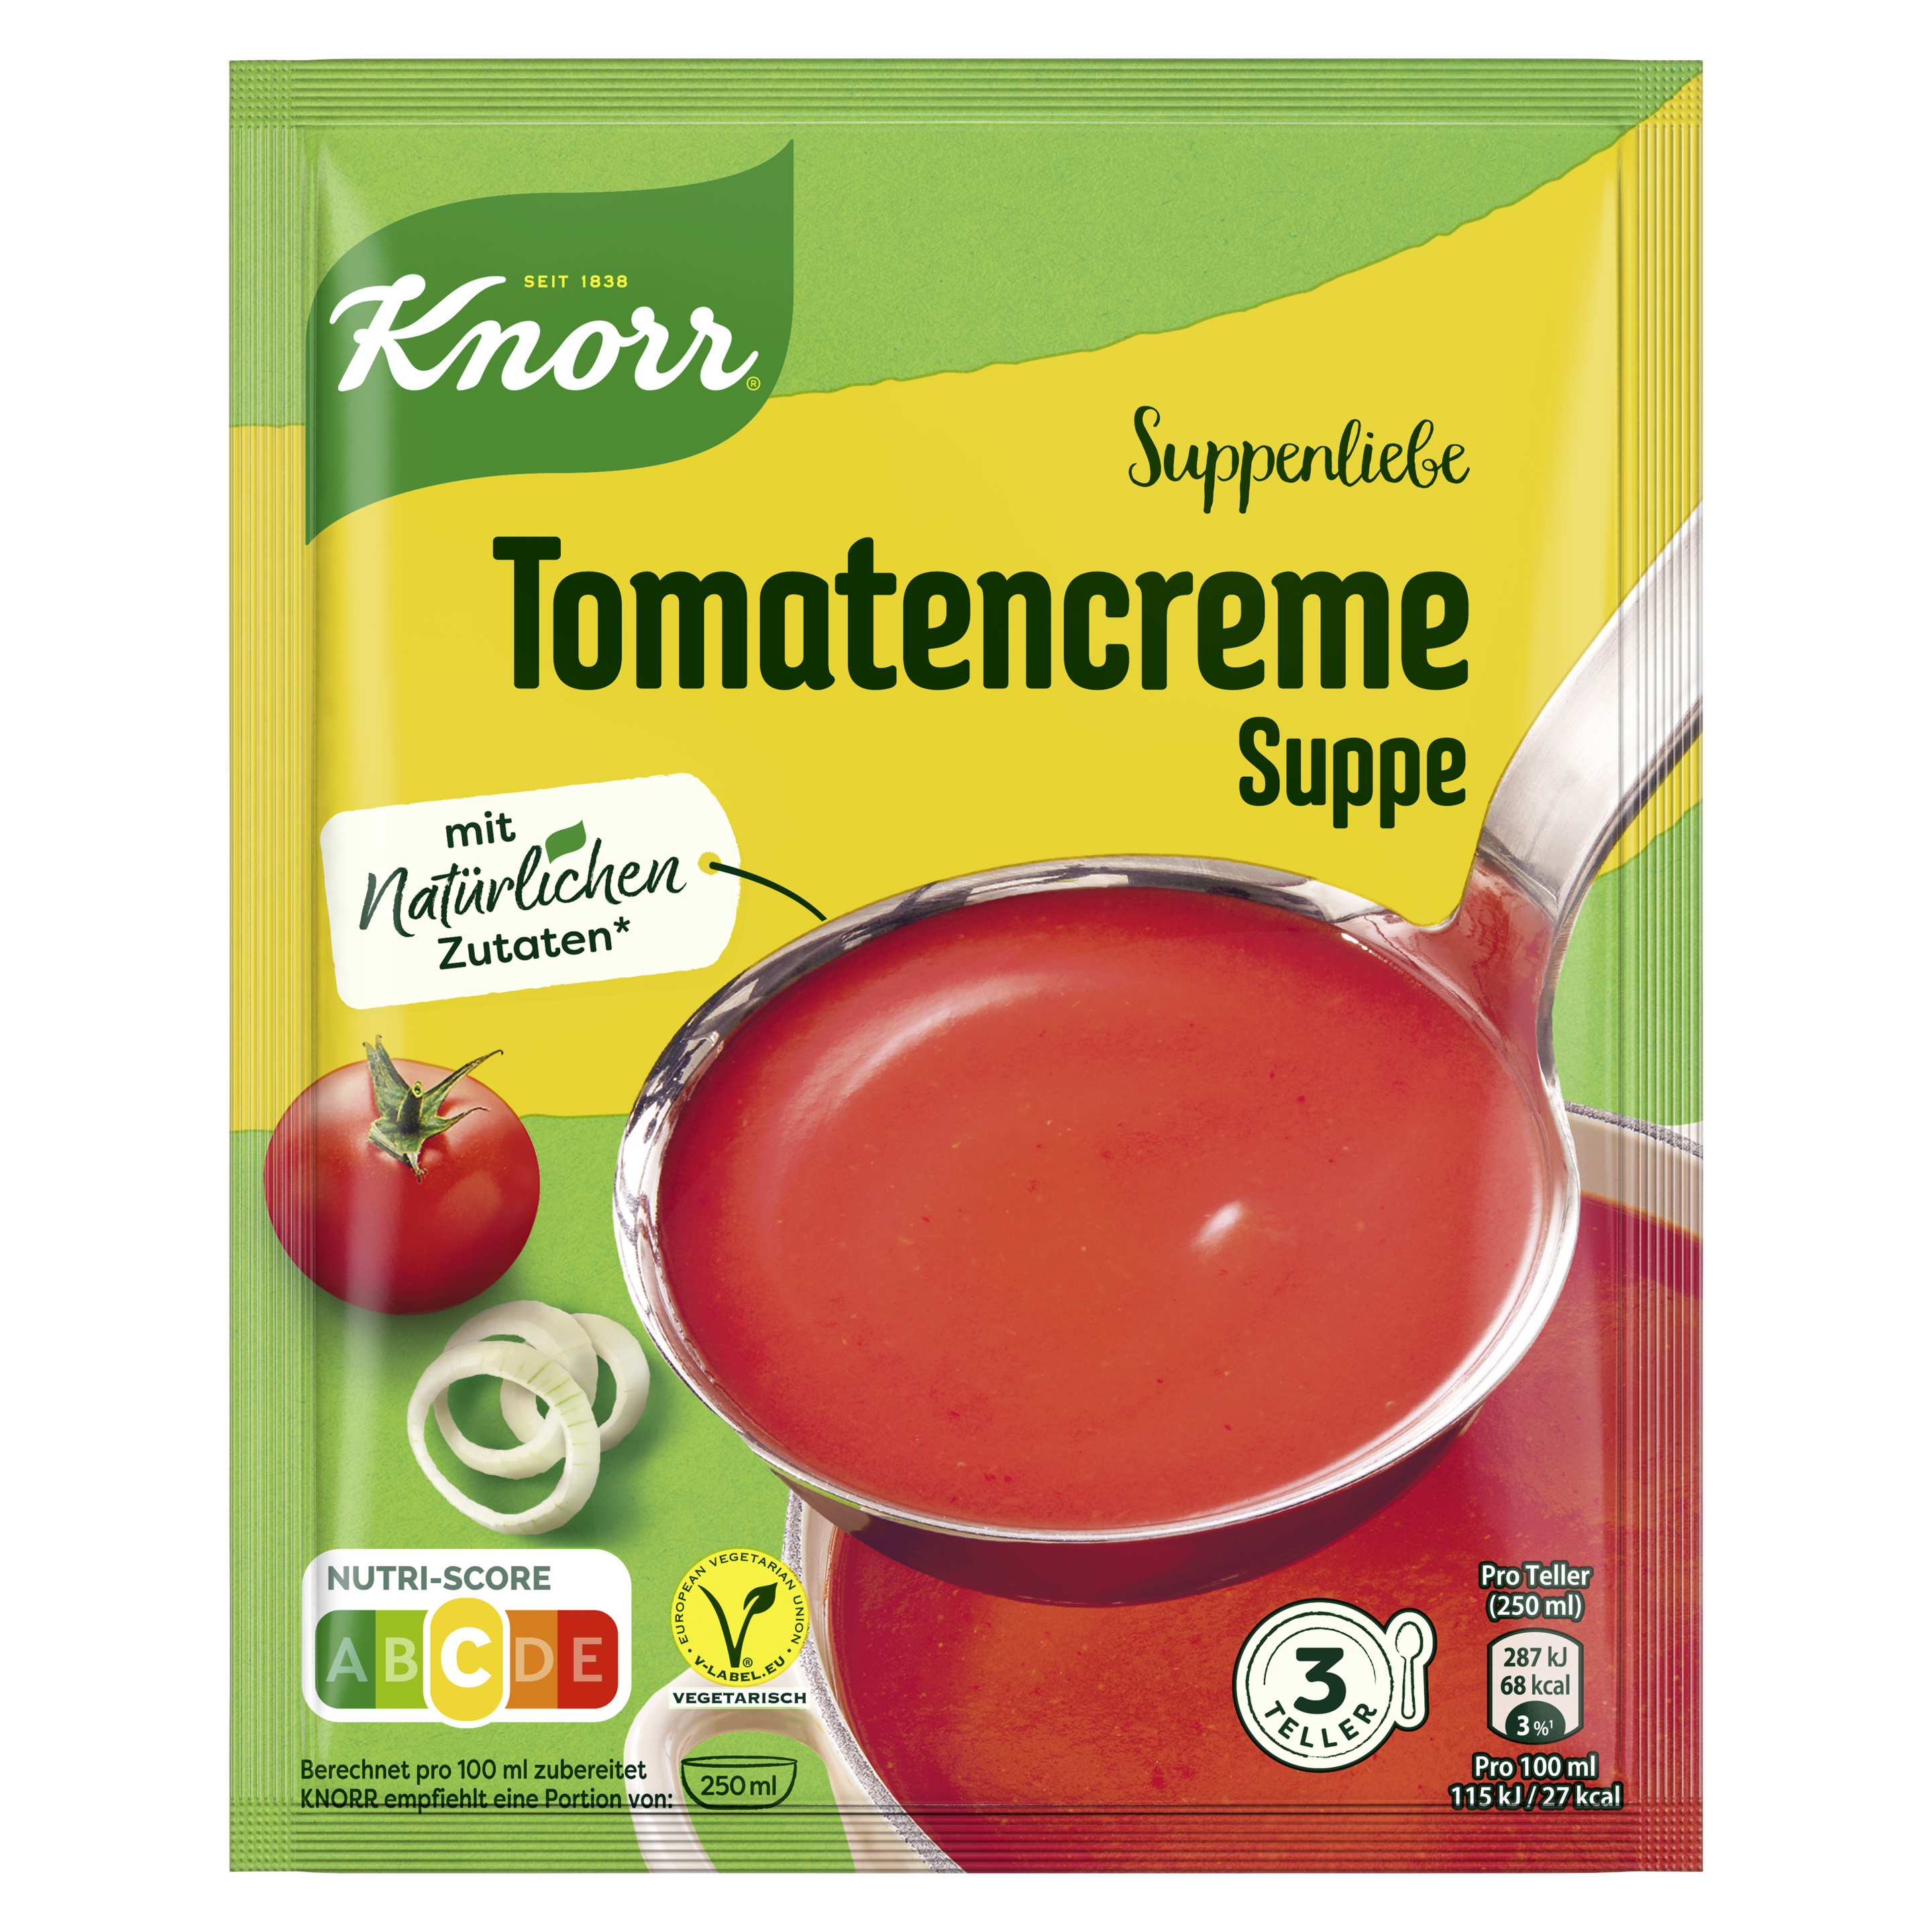 Knorr Suppenliebe Tomatencreme Suppe 750ml Beutel